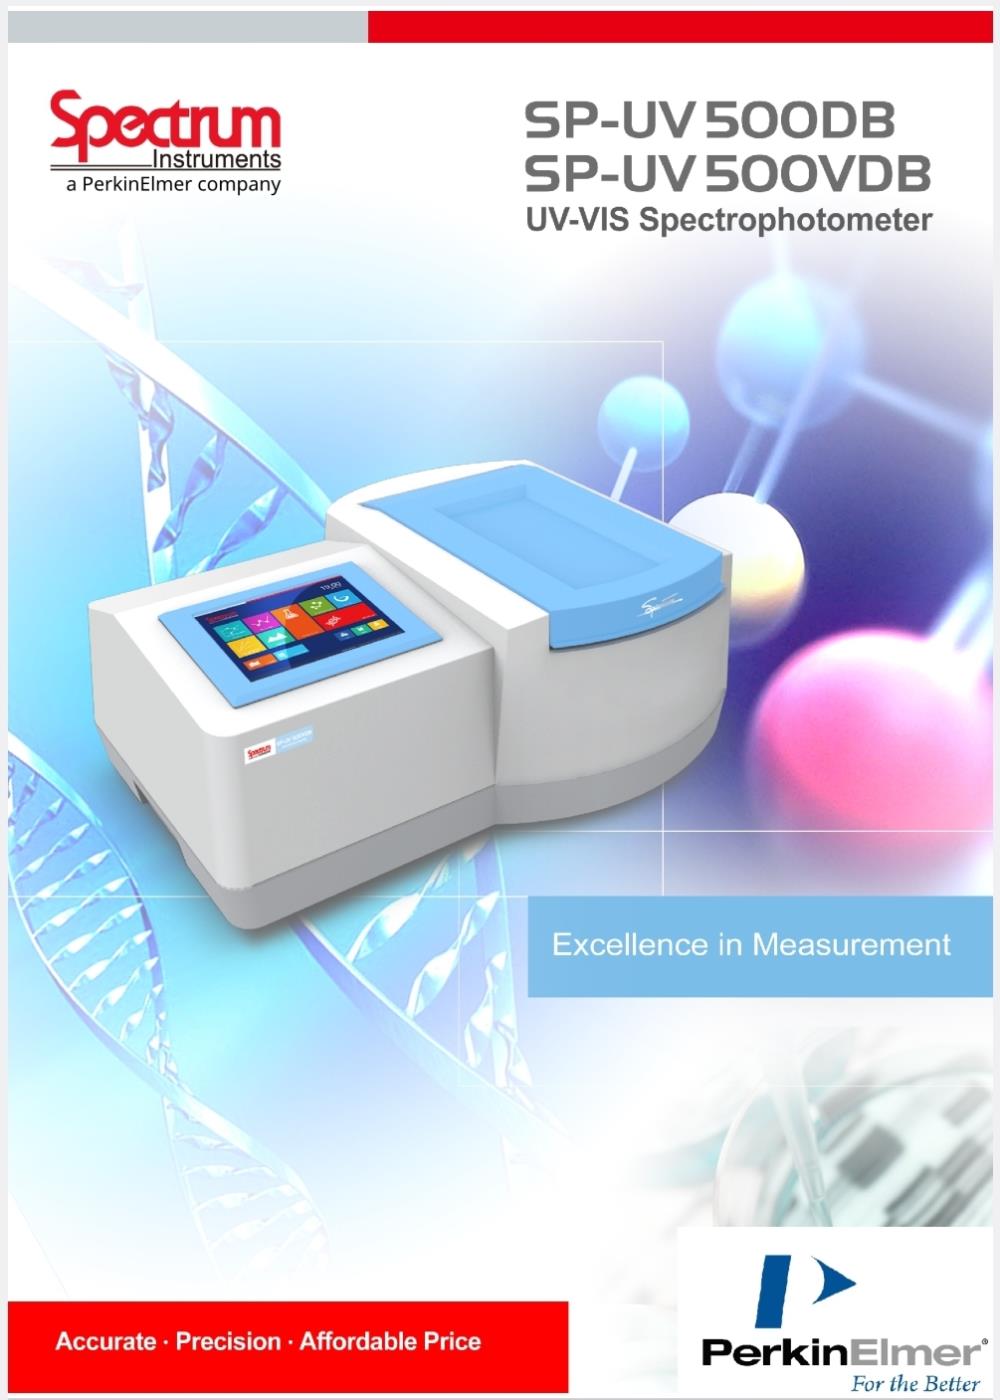 UV-VIS Spectrophotometer Double beam,Fluorescence Spectrophotometer,Spectro,fluorescence,,Spectrum,Energy and Environment/Environment Instrument